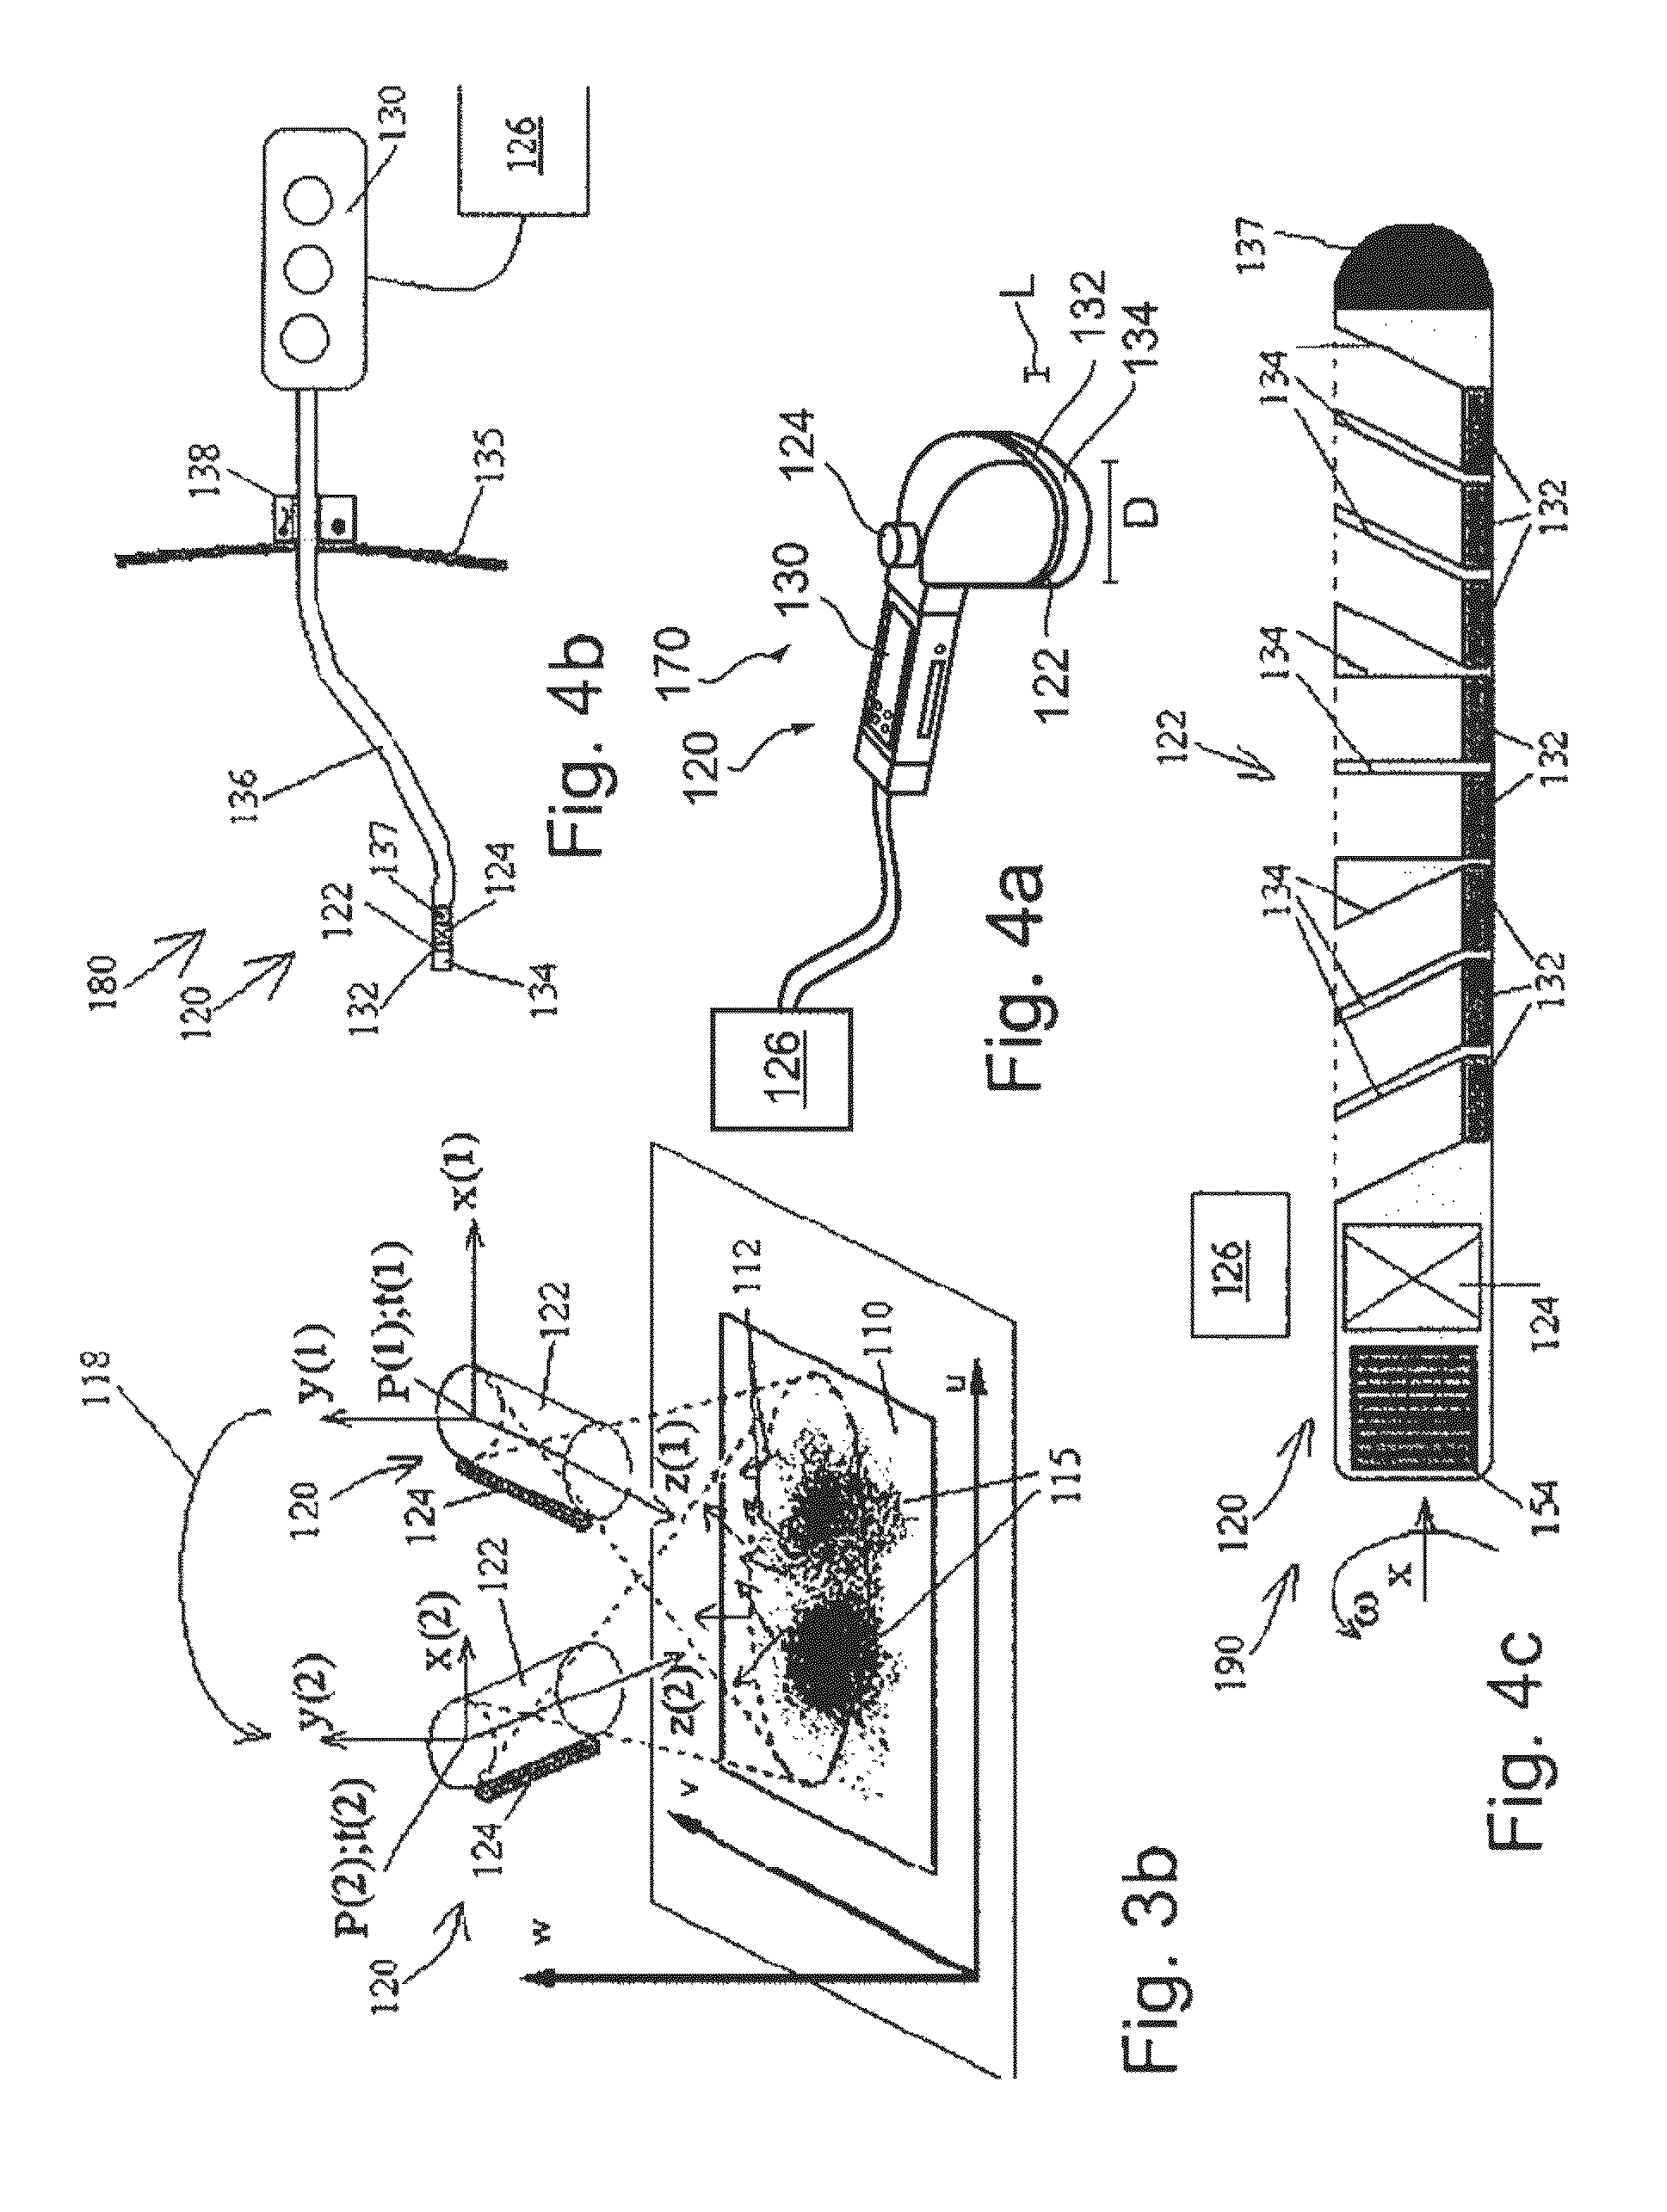 System and method for radioactive emission measurement